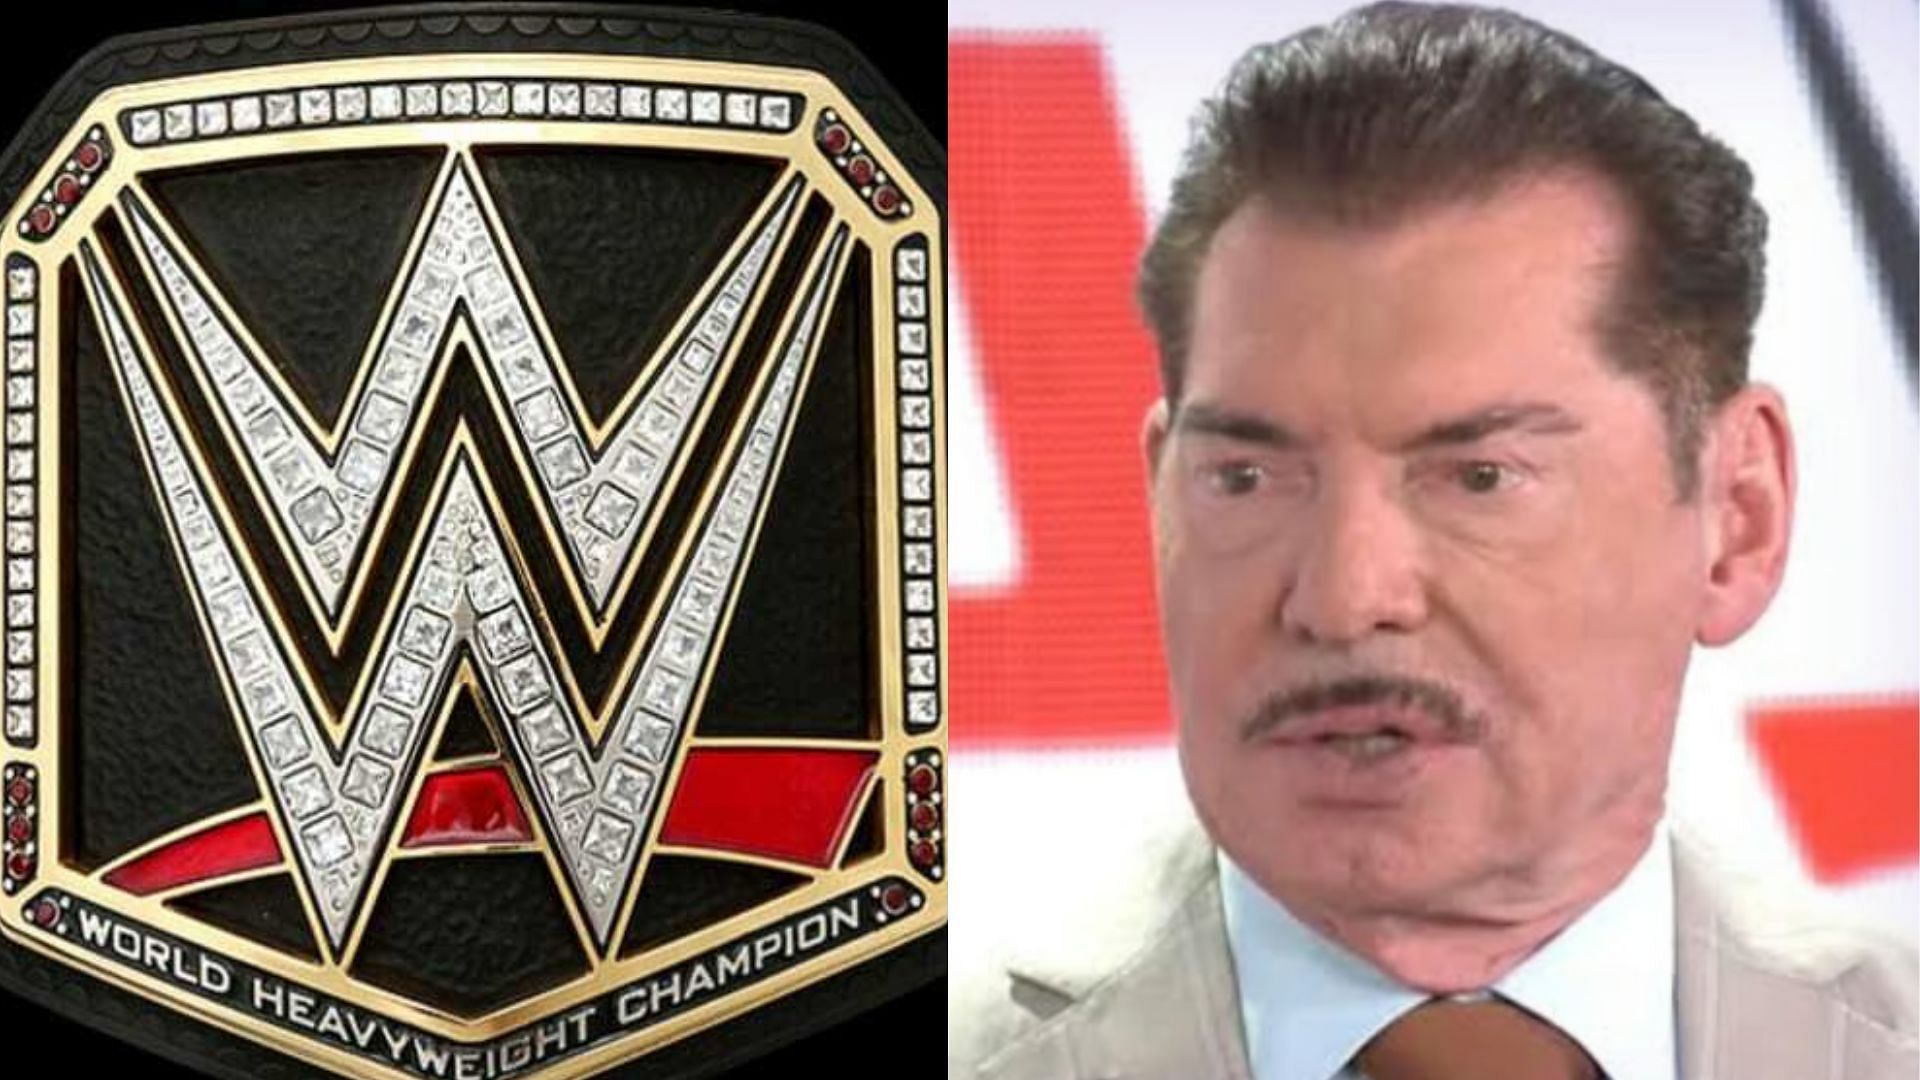 A former WWE Superstar wants to contact Vince McMahon.